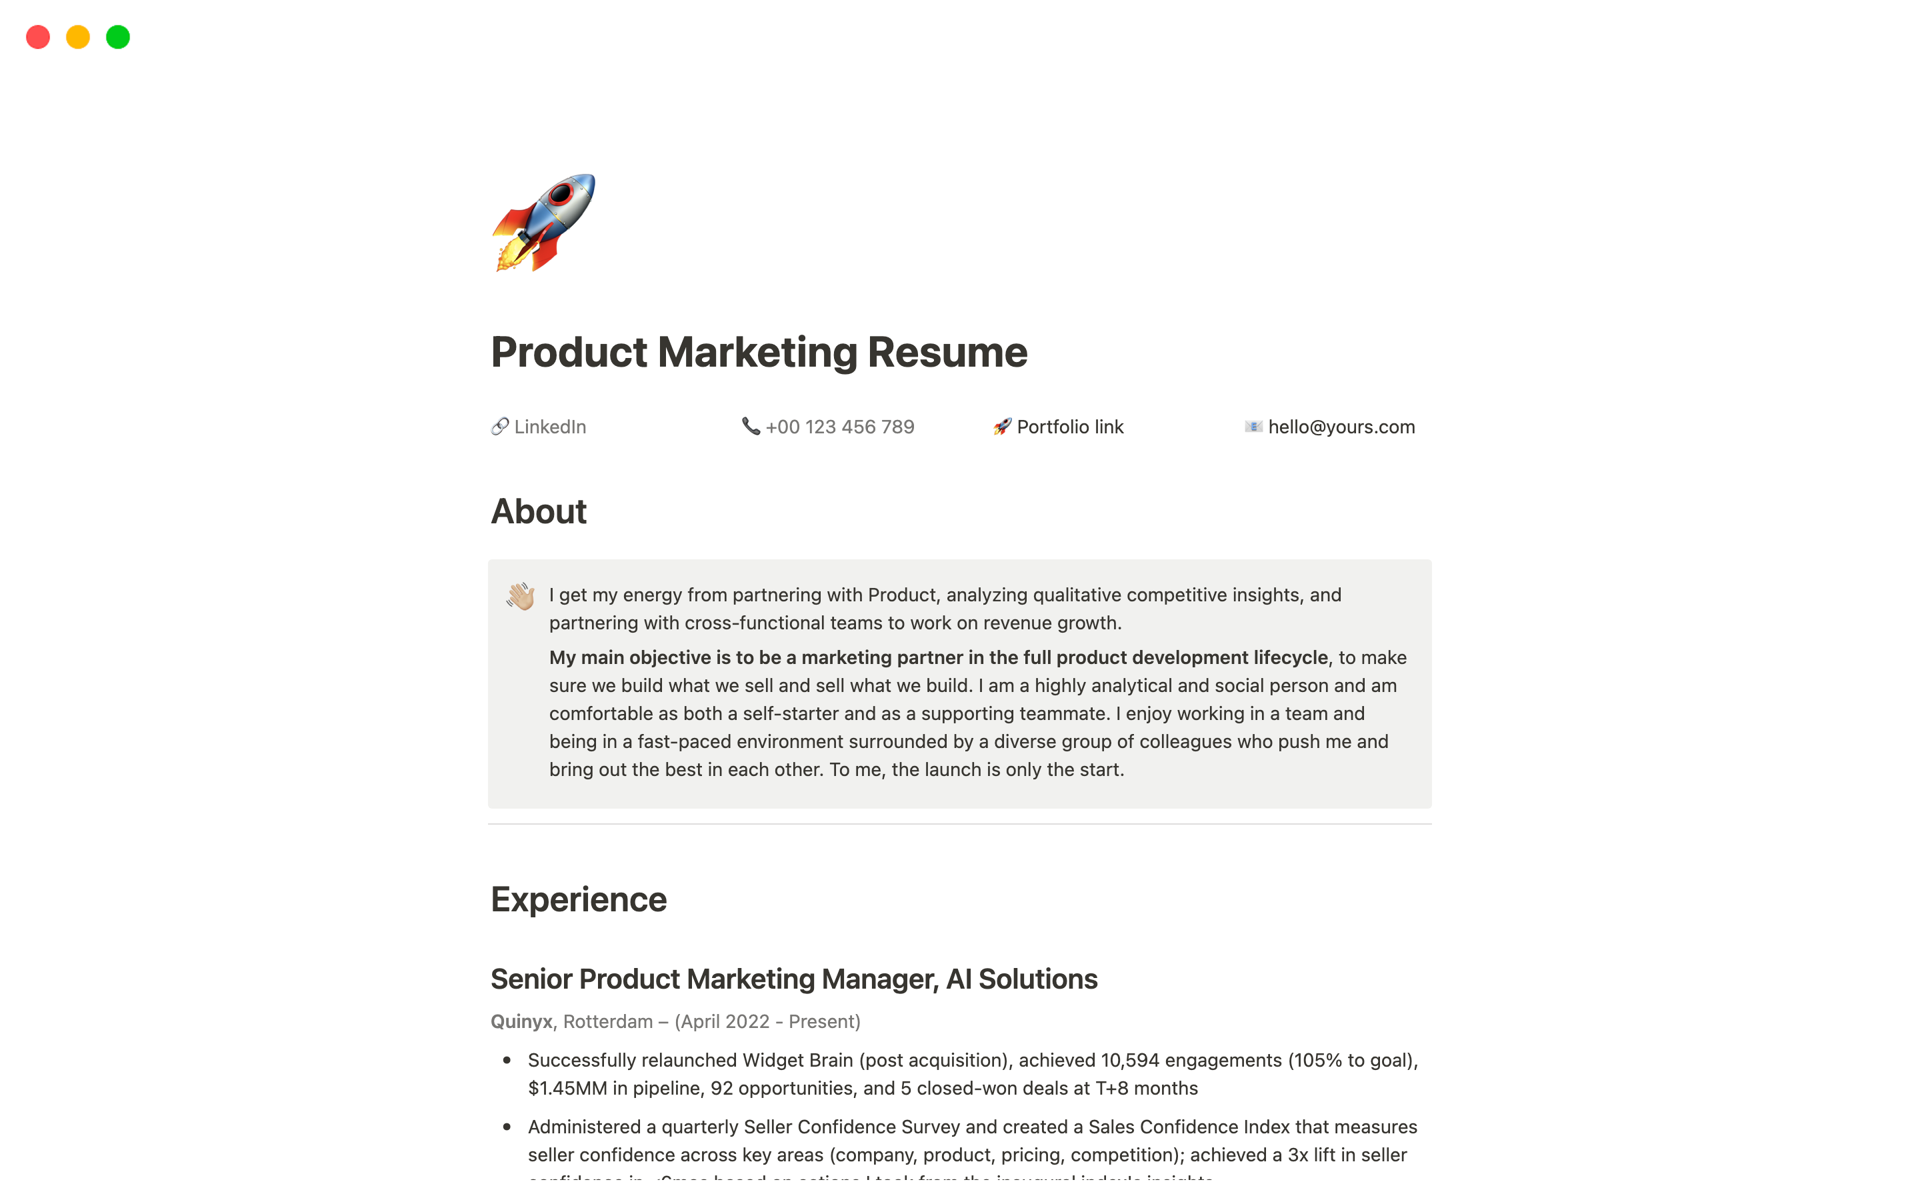 Create a professional Product Marketing resume in Notion